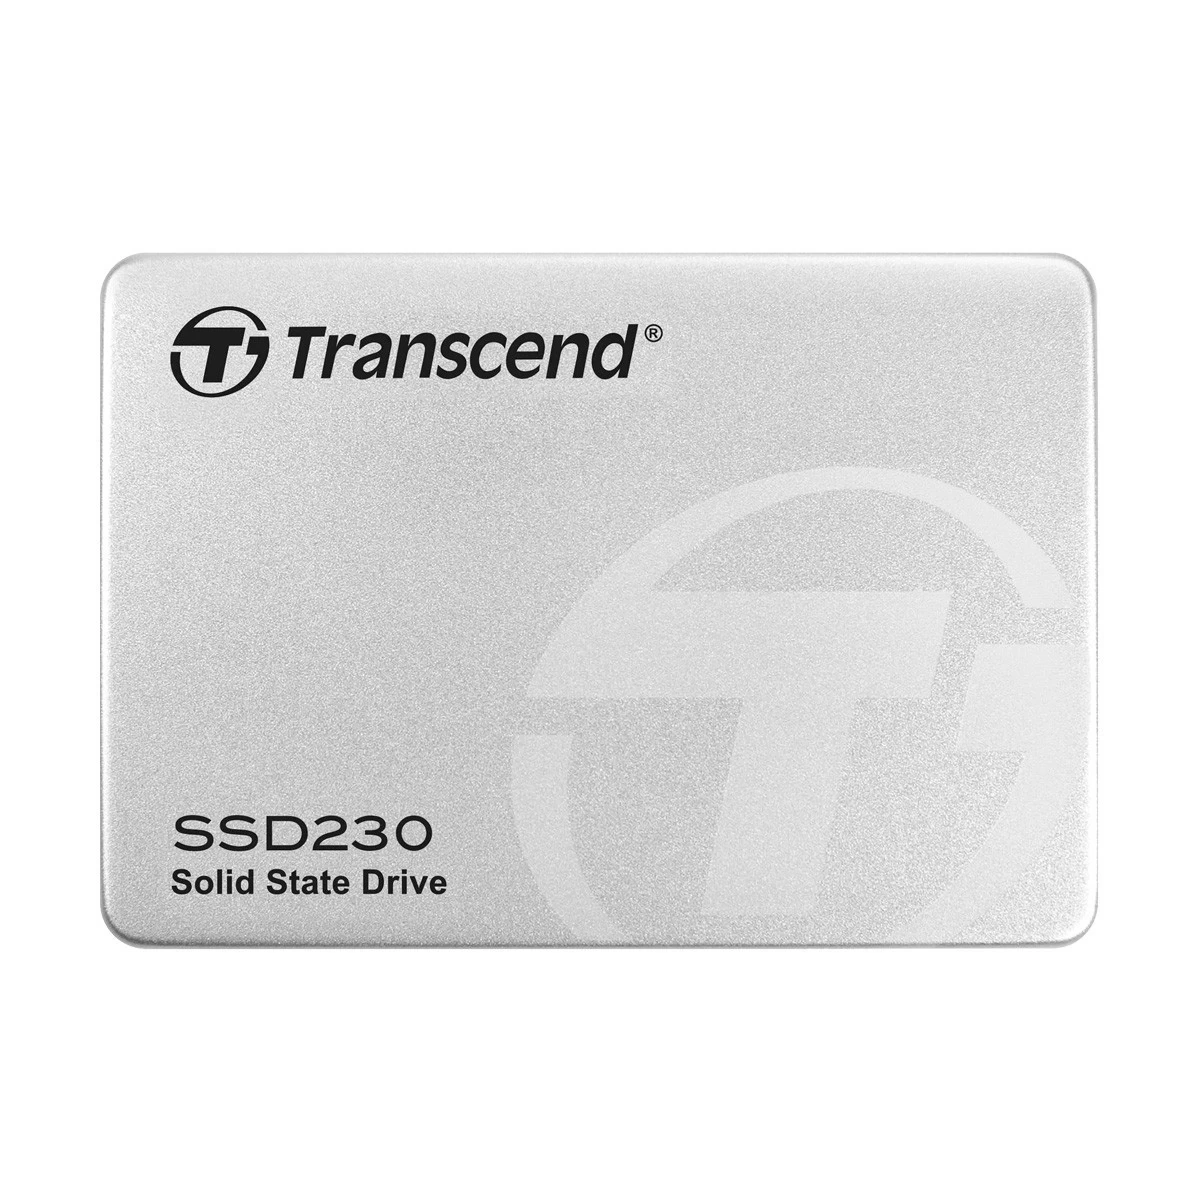 Transcend 256GB 2.5" SATA III SSD Solid State Drive with DDR3 Dram Cache, 3D NAND Flash, 560 MB/s Read Speed | SSD230S